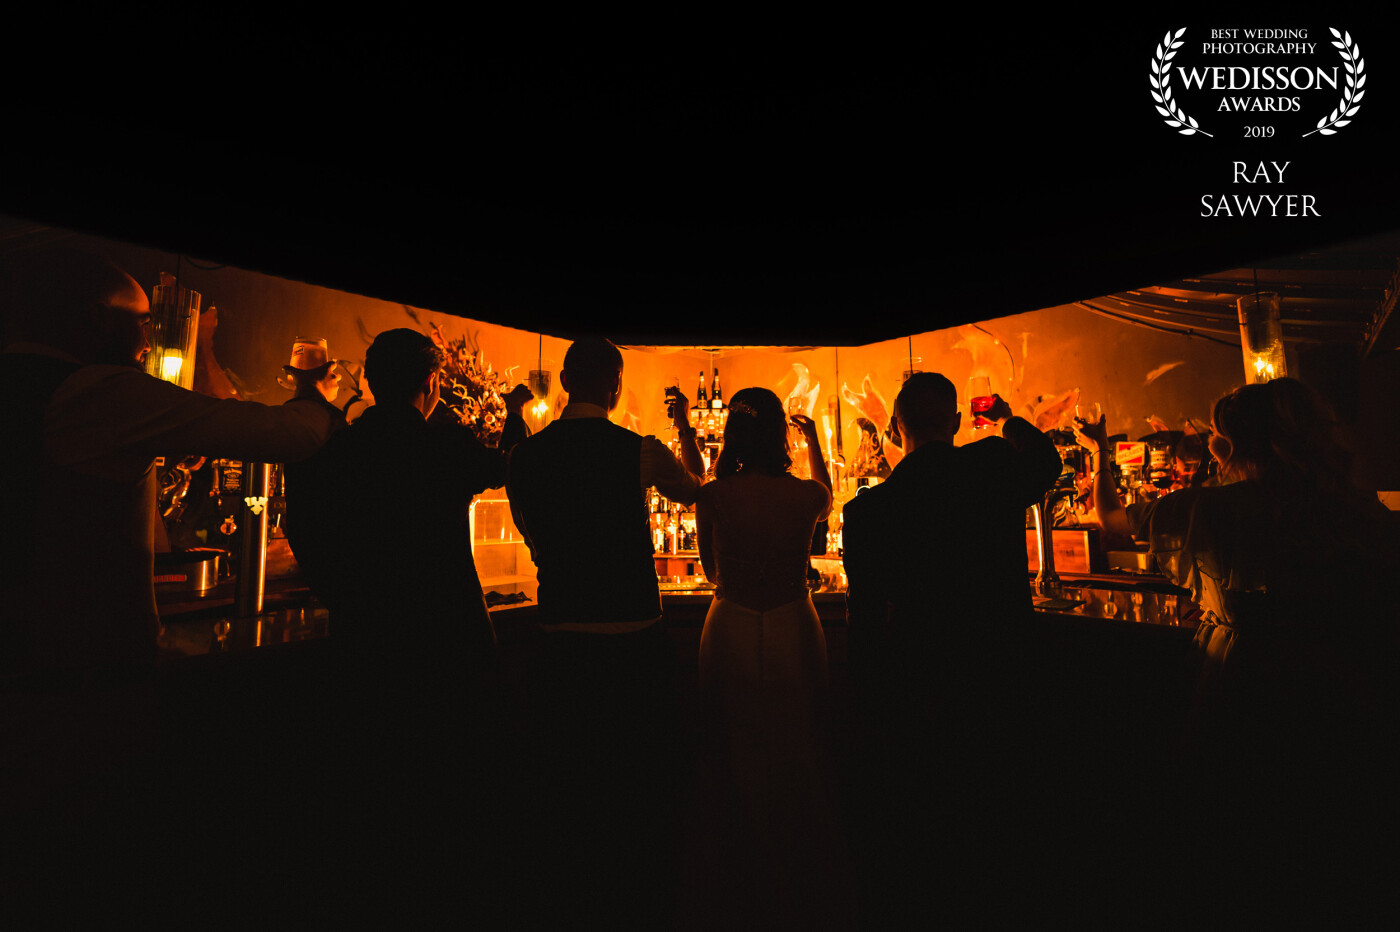 The bar at the hotel had an interesting shape so I added some full CTO gels to my flash and created a silhouette shot of the bridegroom and friends raising a glass to happiness.